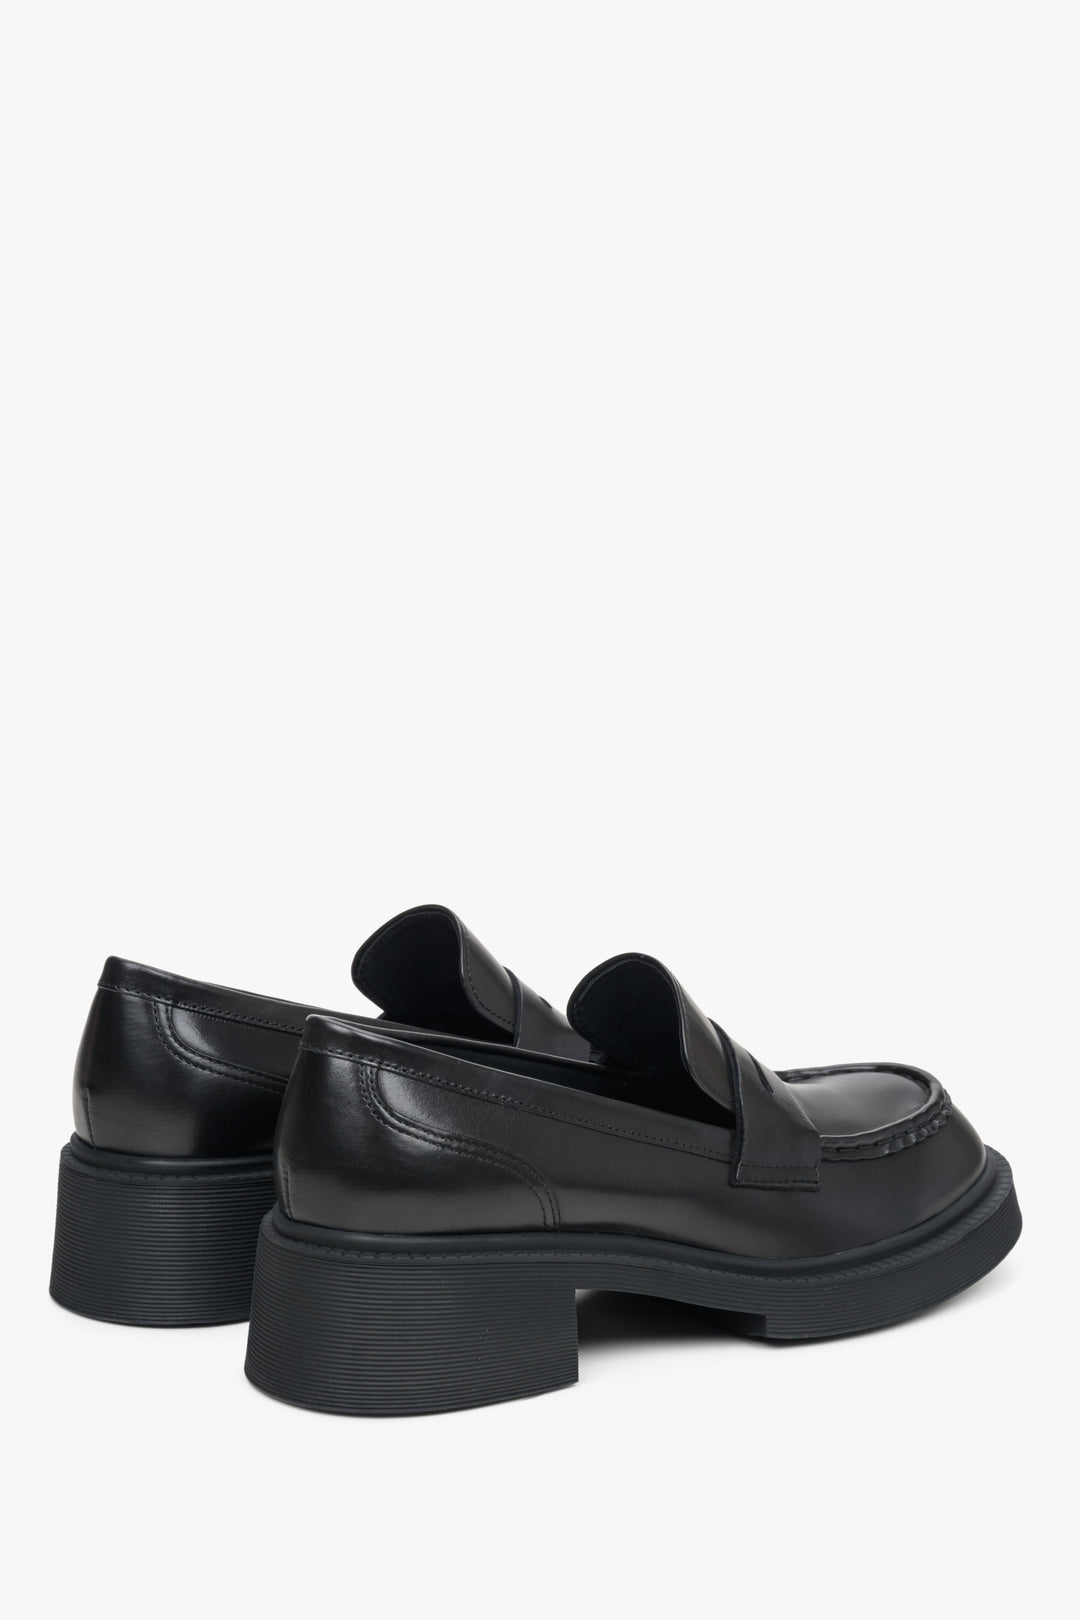 Women's black leather moccasin shoes with a stable heel, Estro - close-up on the side line and heel counters.